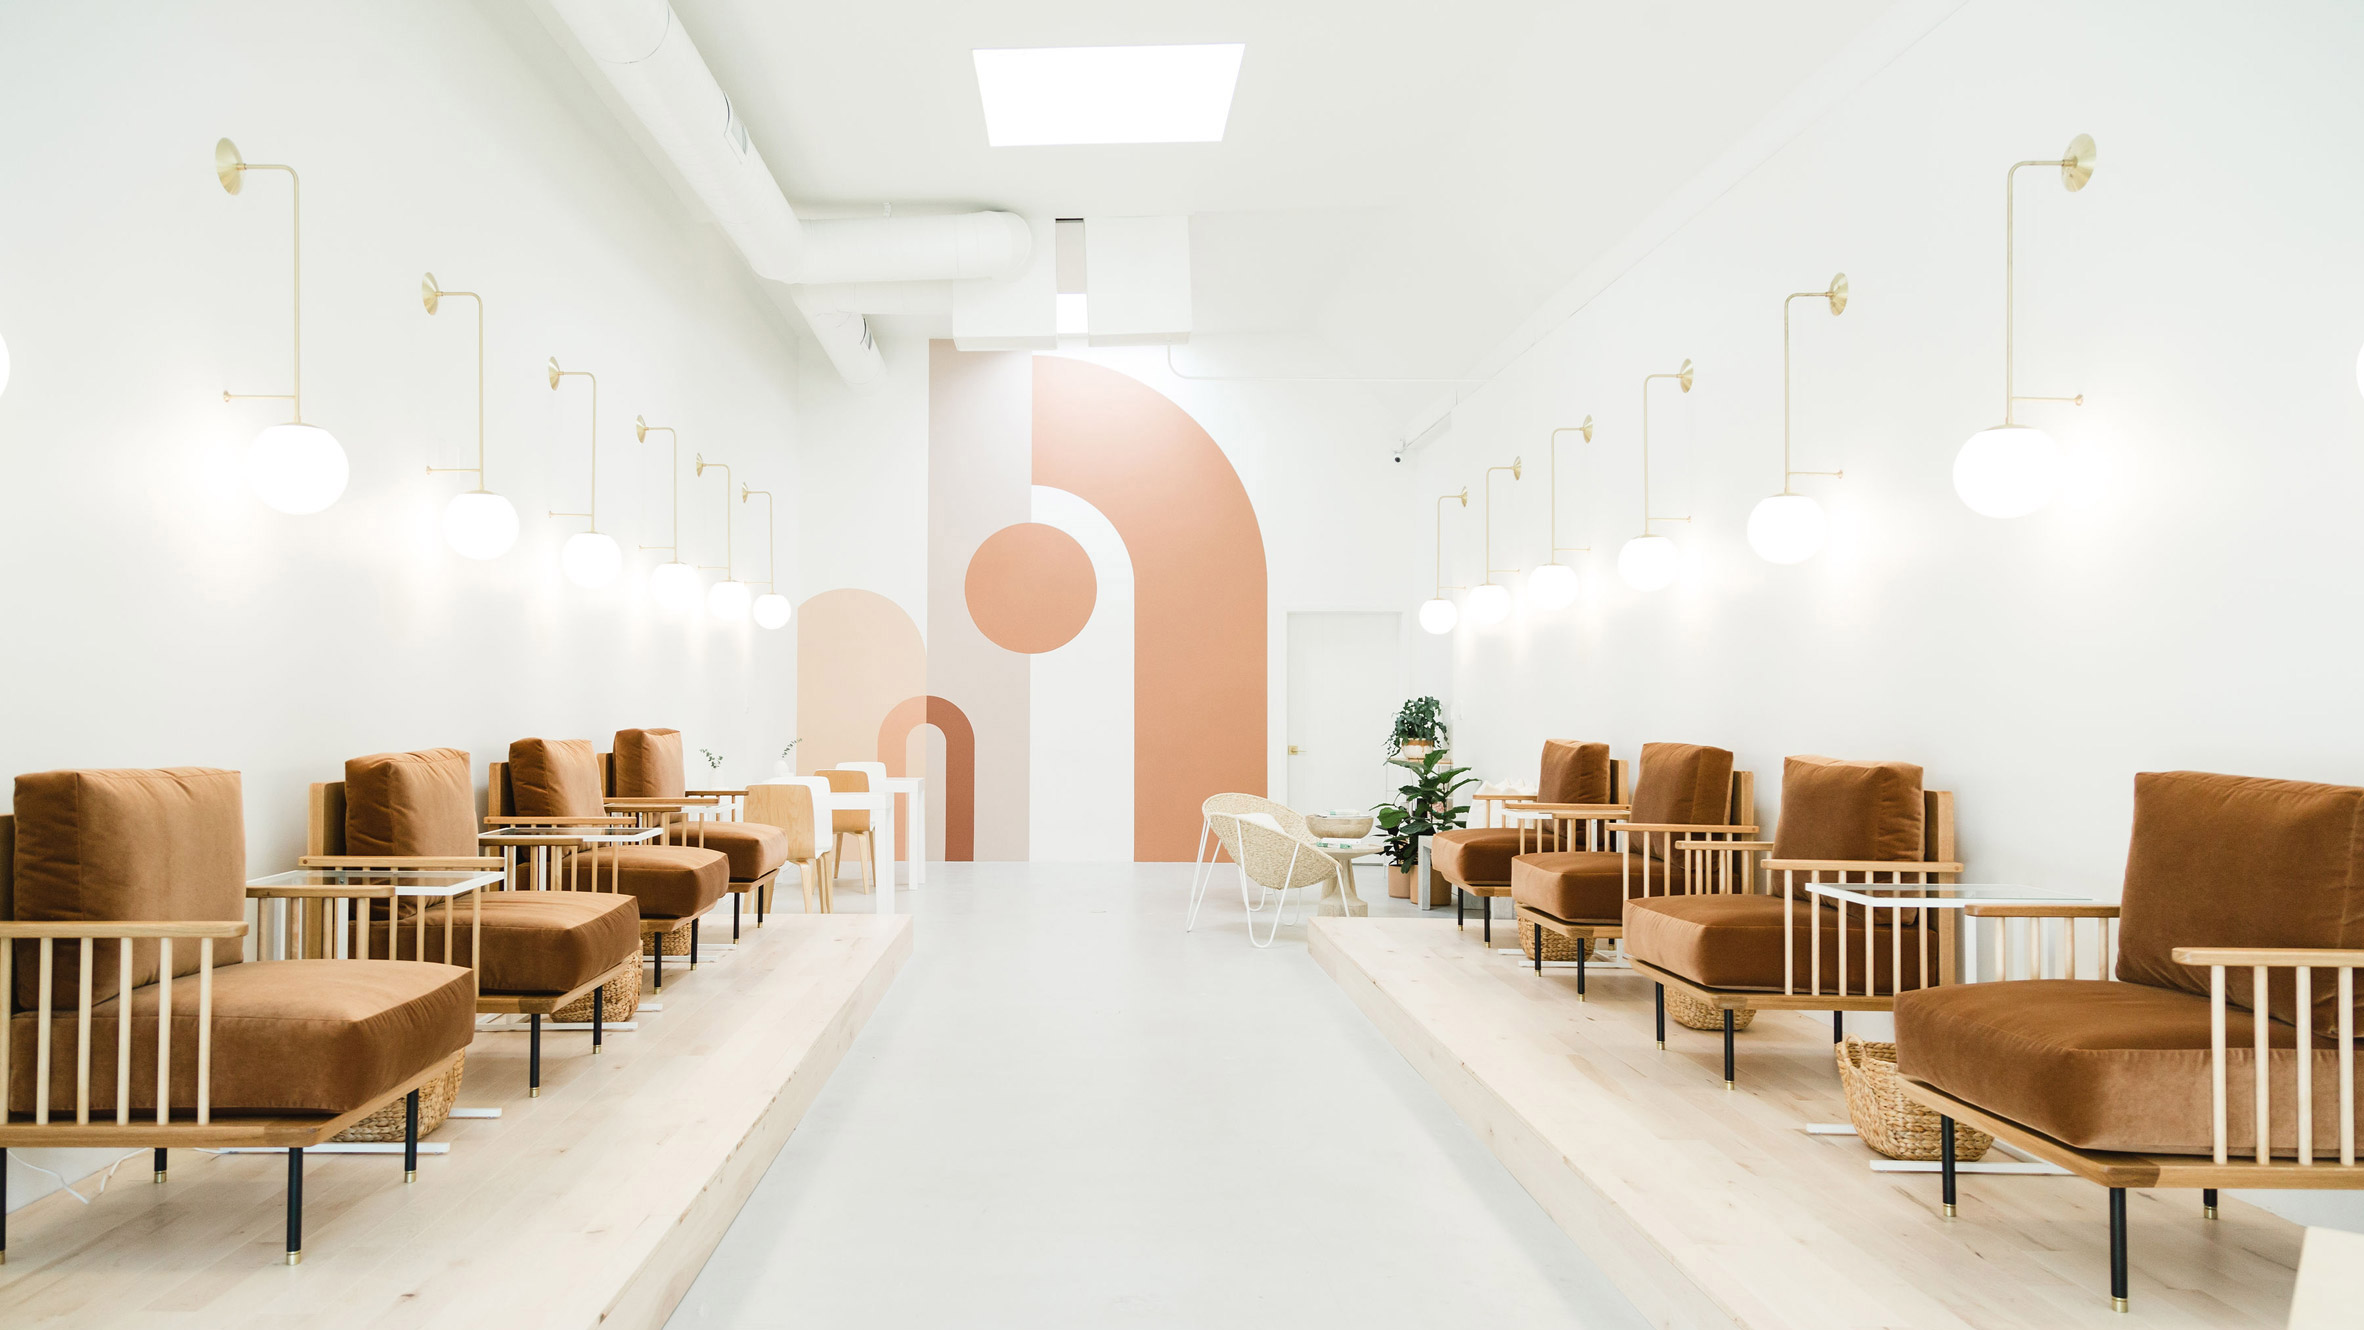 Katie Gebhardt Opts For Simplicity At Leo Nail Salon In San